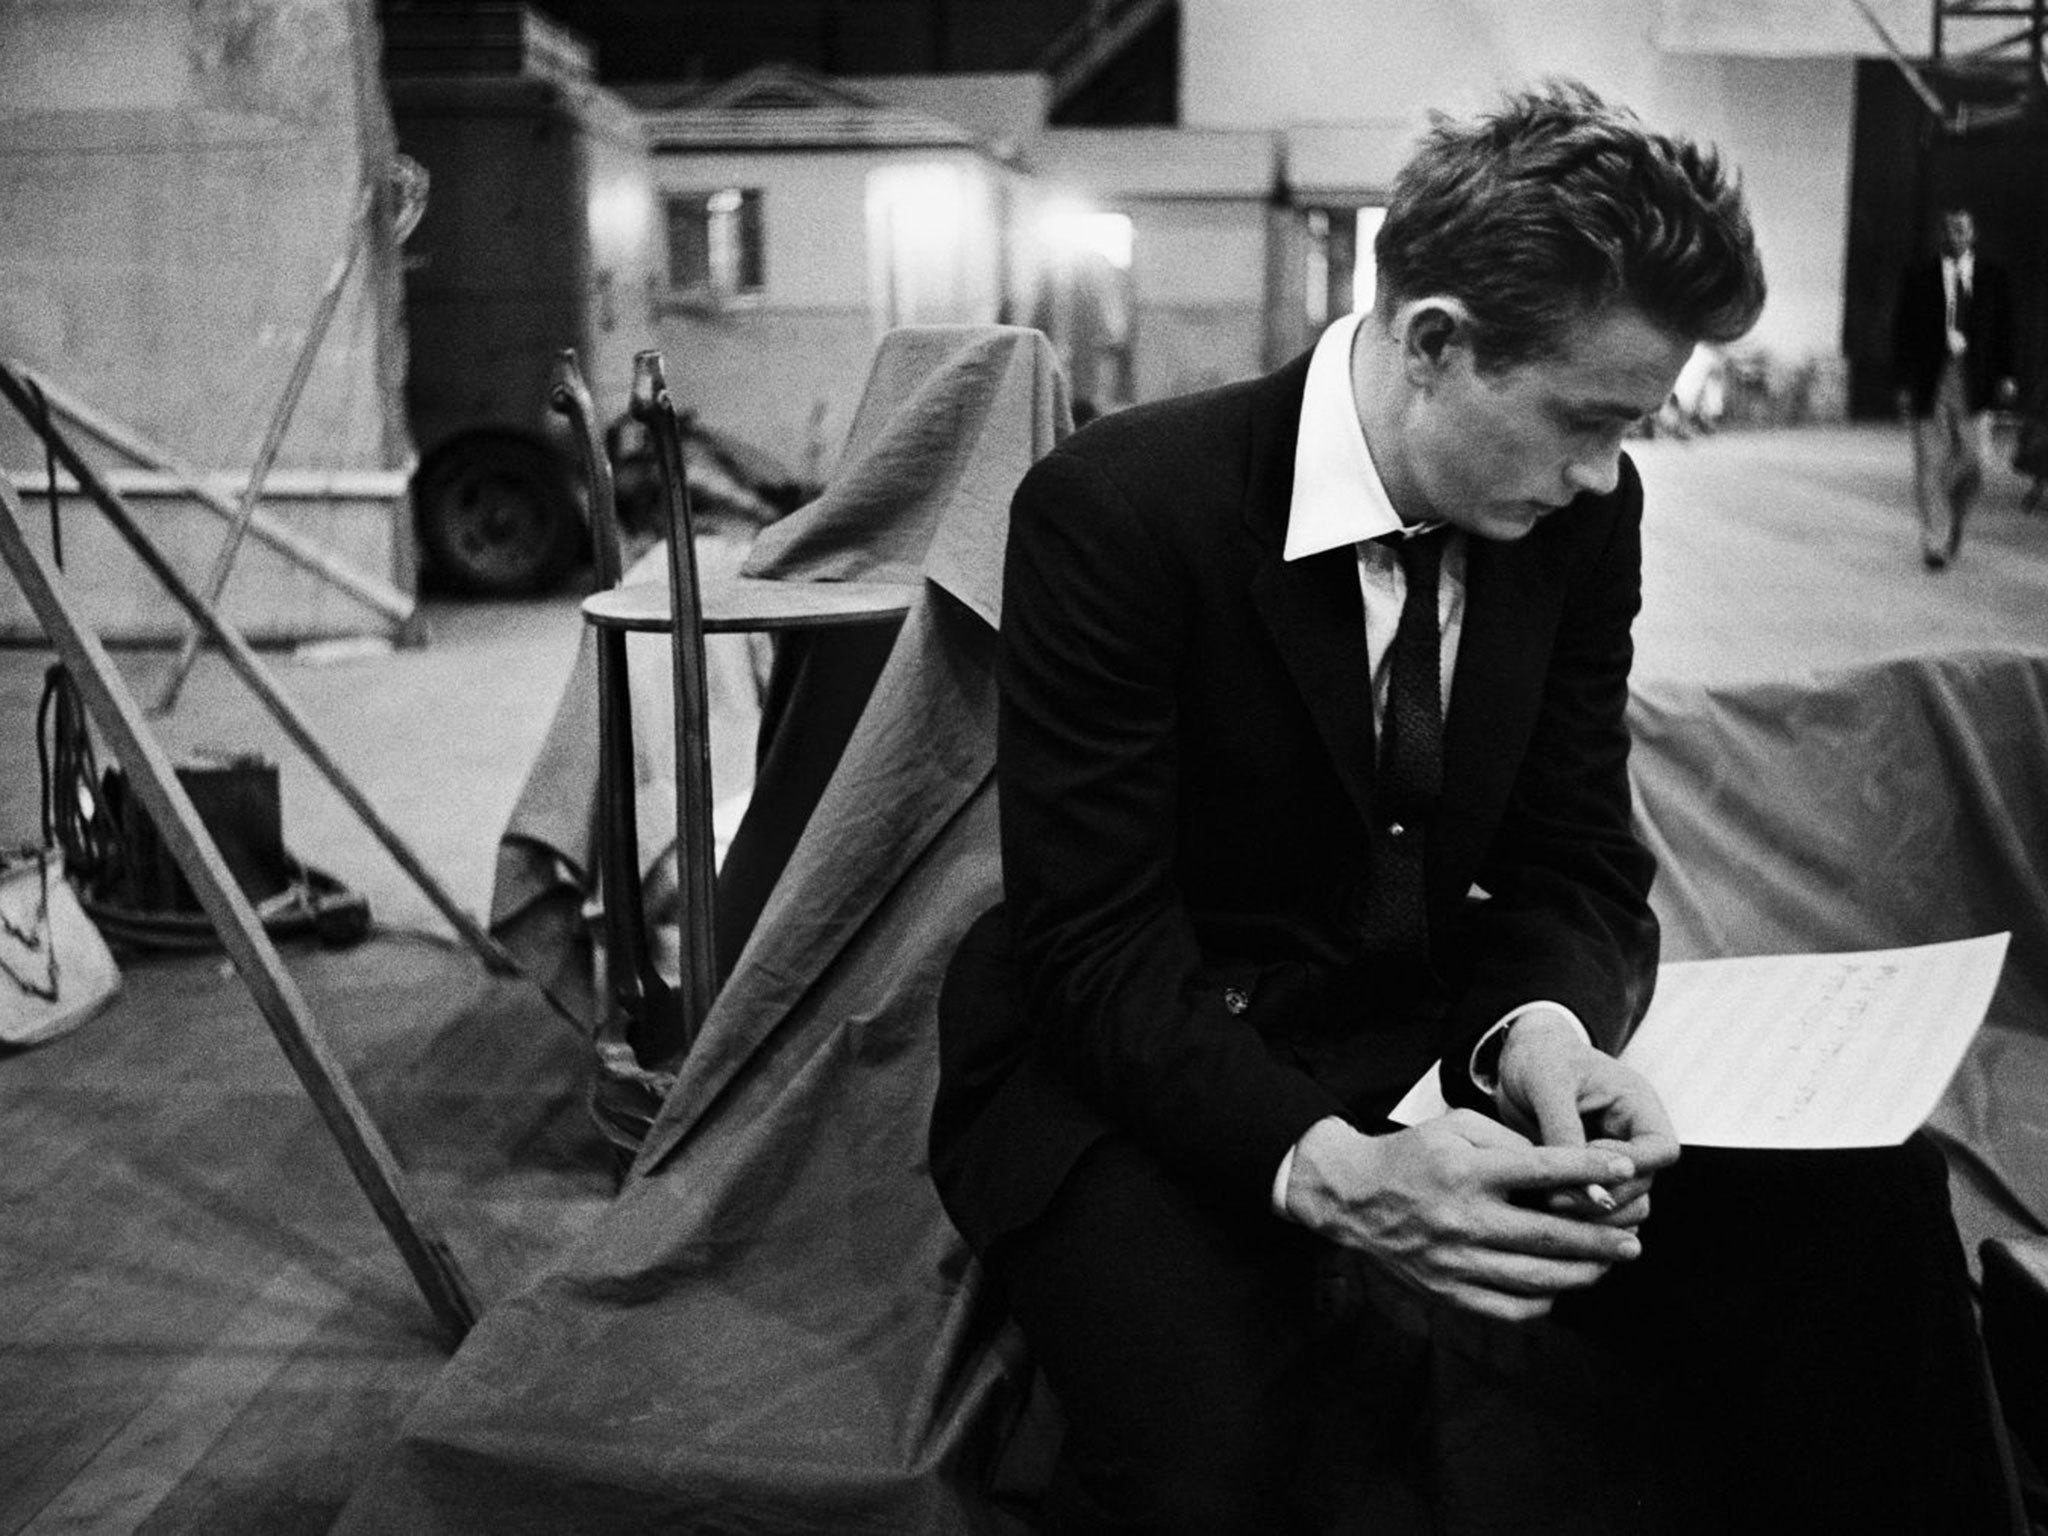 James Dean on the set of 'Rebel without a Cause', 1955